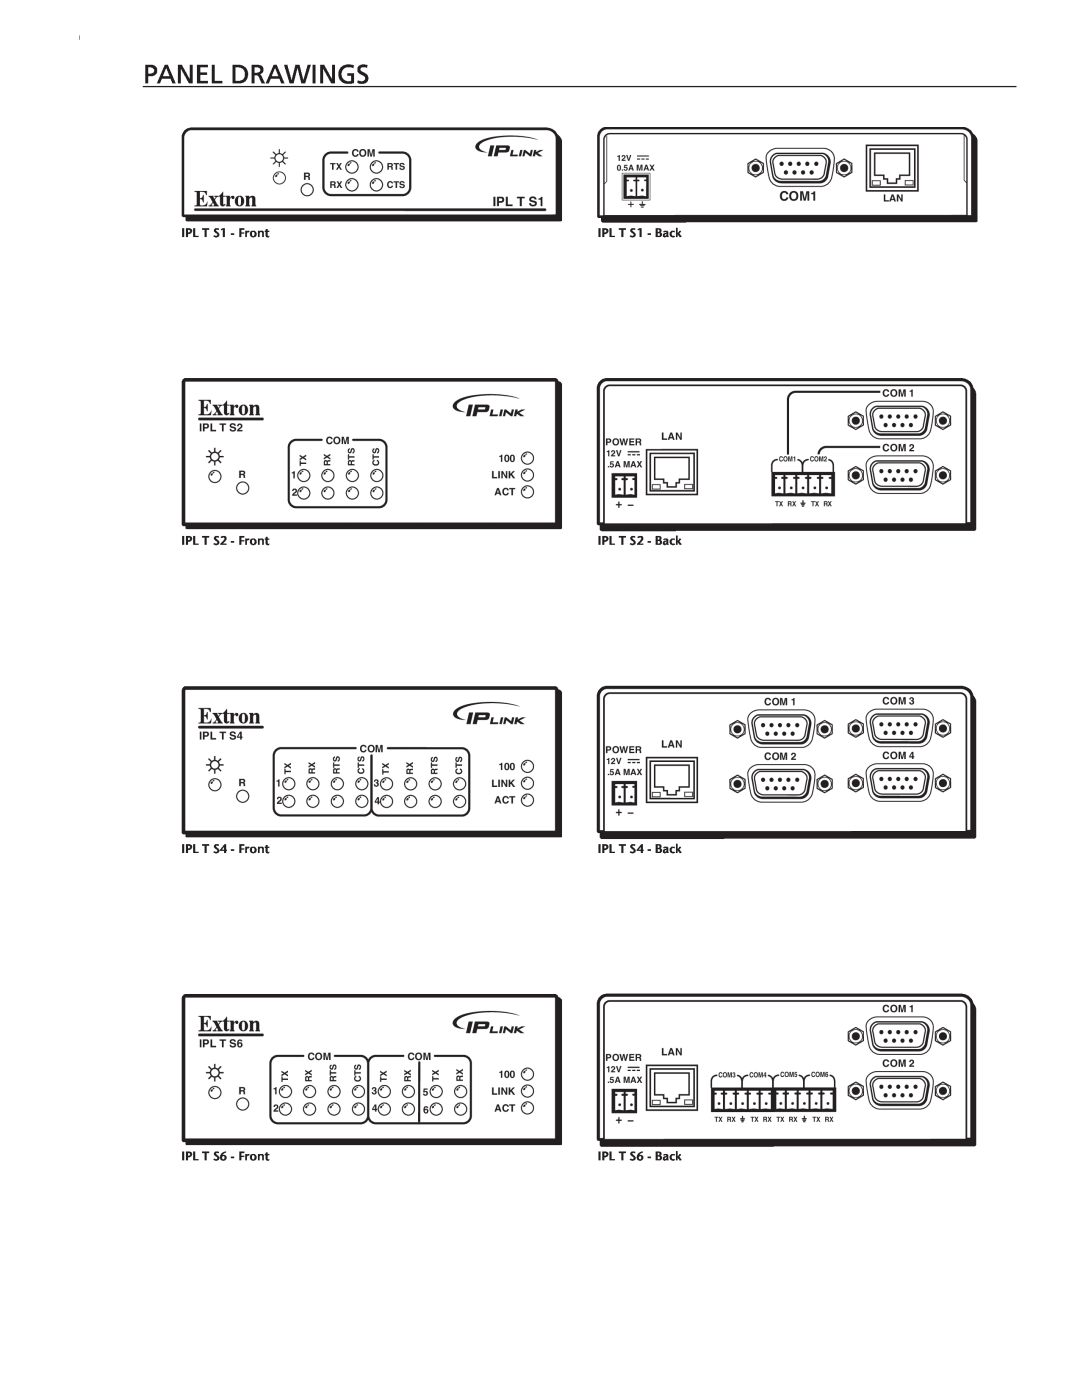 Extron electronic manual Panel Drawings, IPL T S1, COM1 LAN, IPL T S2 COM, Link, IPL T S4 COM, Com Com, IPL T S6 